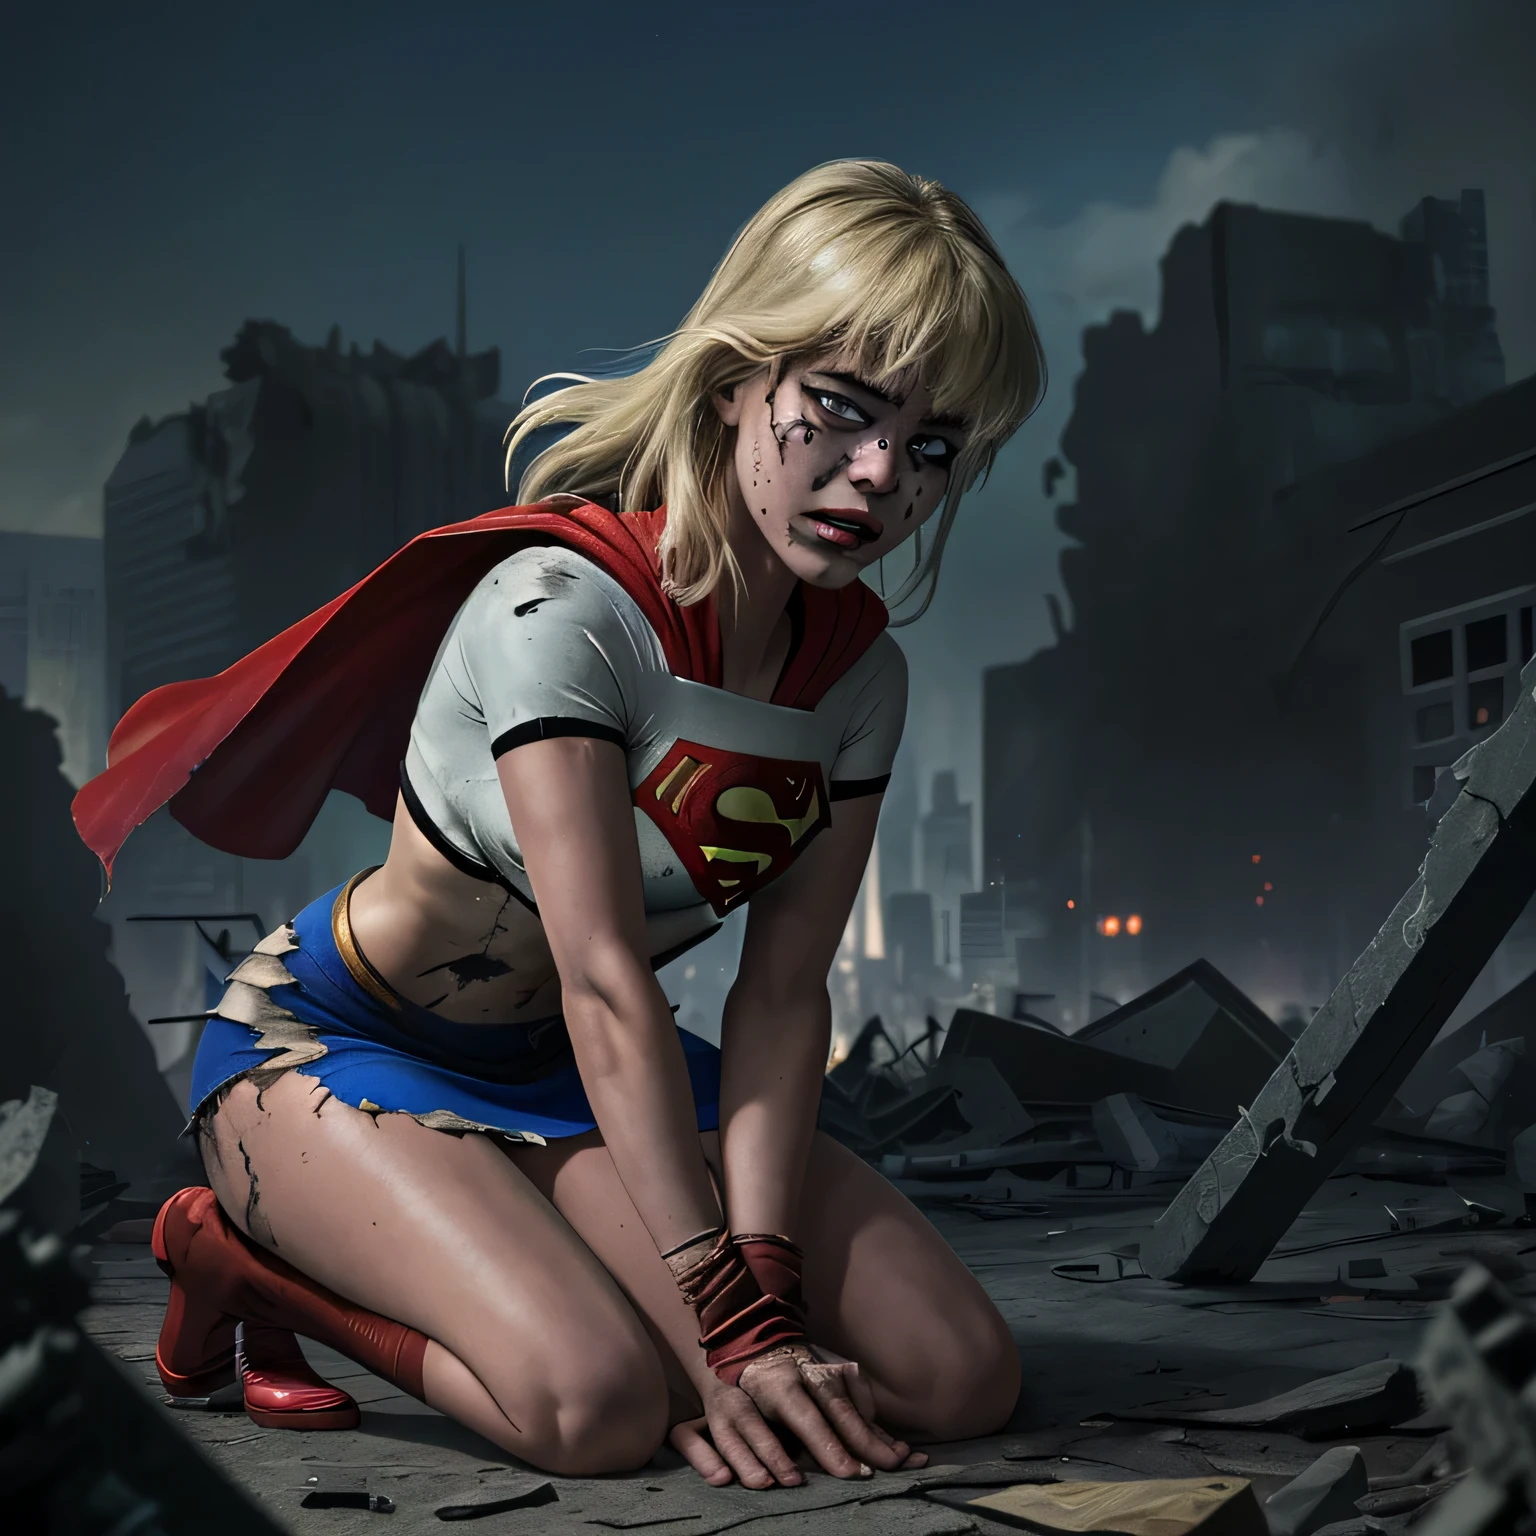 Supergirl,harshly beaten,costume torn and tattered,getting up being on her knees,cuts and bruises everywhere,nose bleeding,black eye,war torn, destroyed city background, masterpiece, maxres